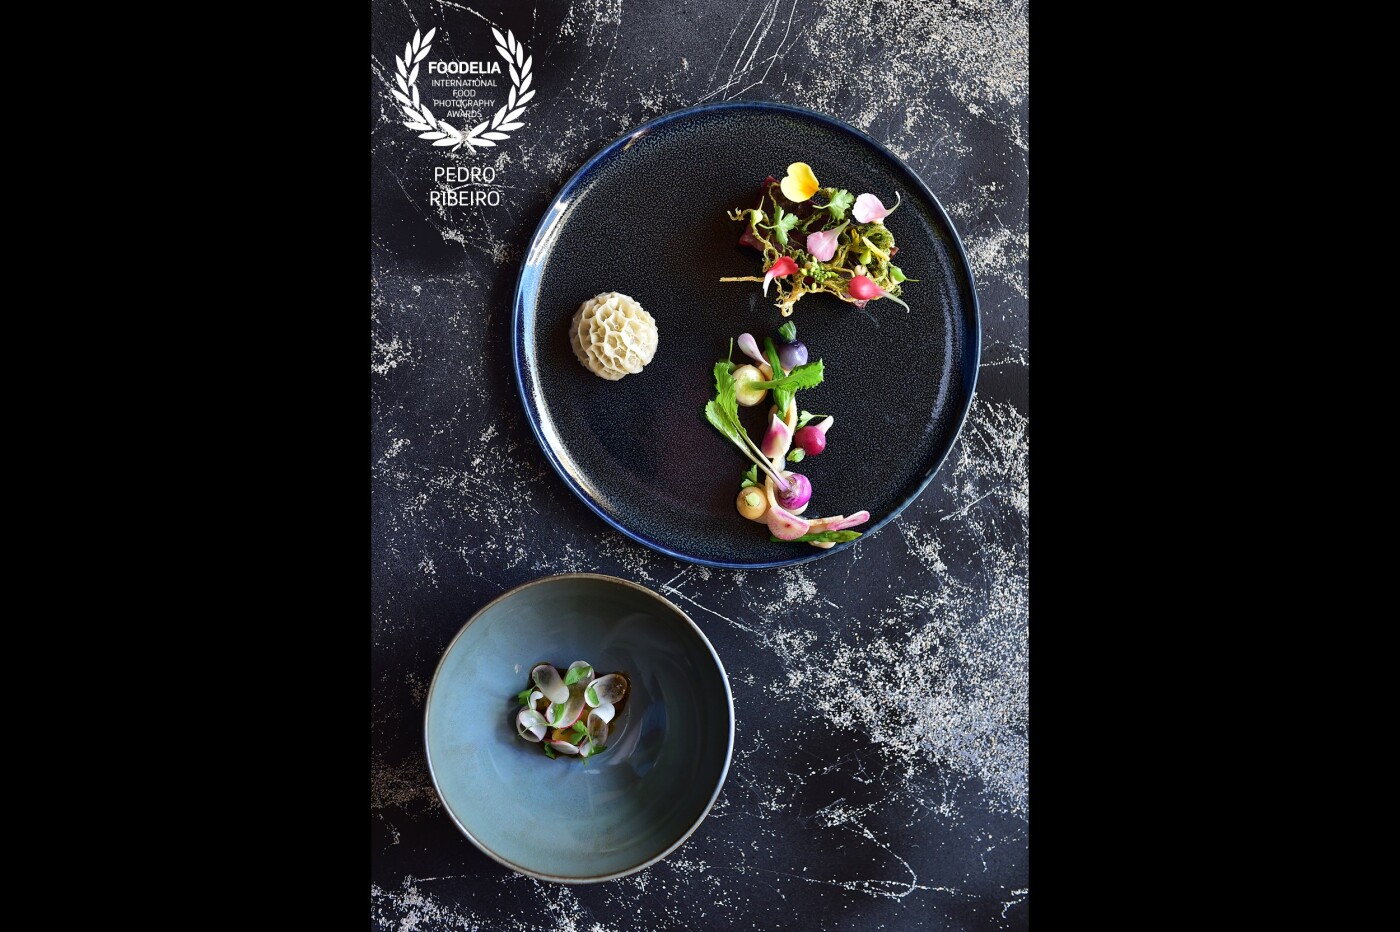 This imagem was made while visiting the one star Michelin restaurante Fortaleza do Guincho in Cascais, Portugal.<br />
This menu with sea inspiration was create by Michelin star chefe Miguel Rocha Vieira. 